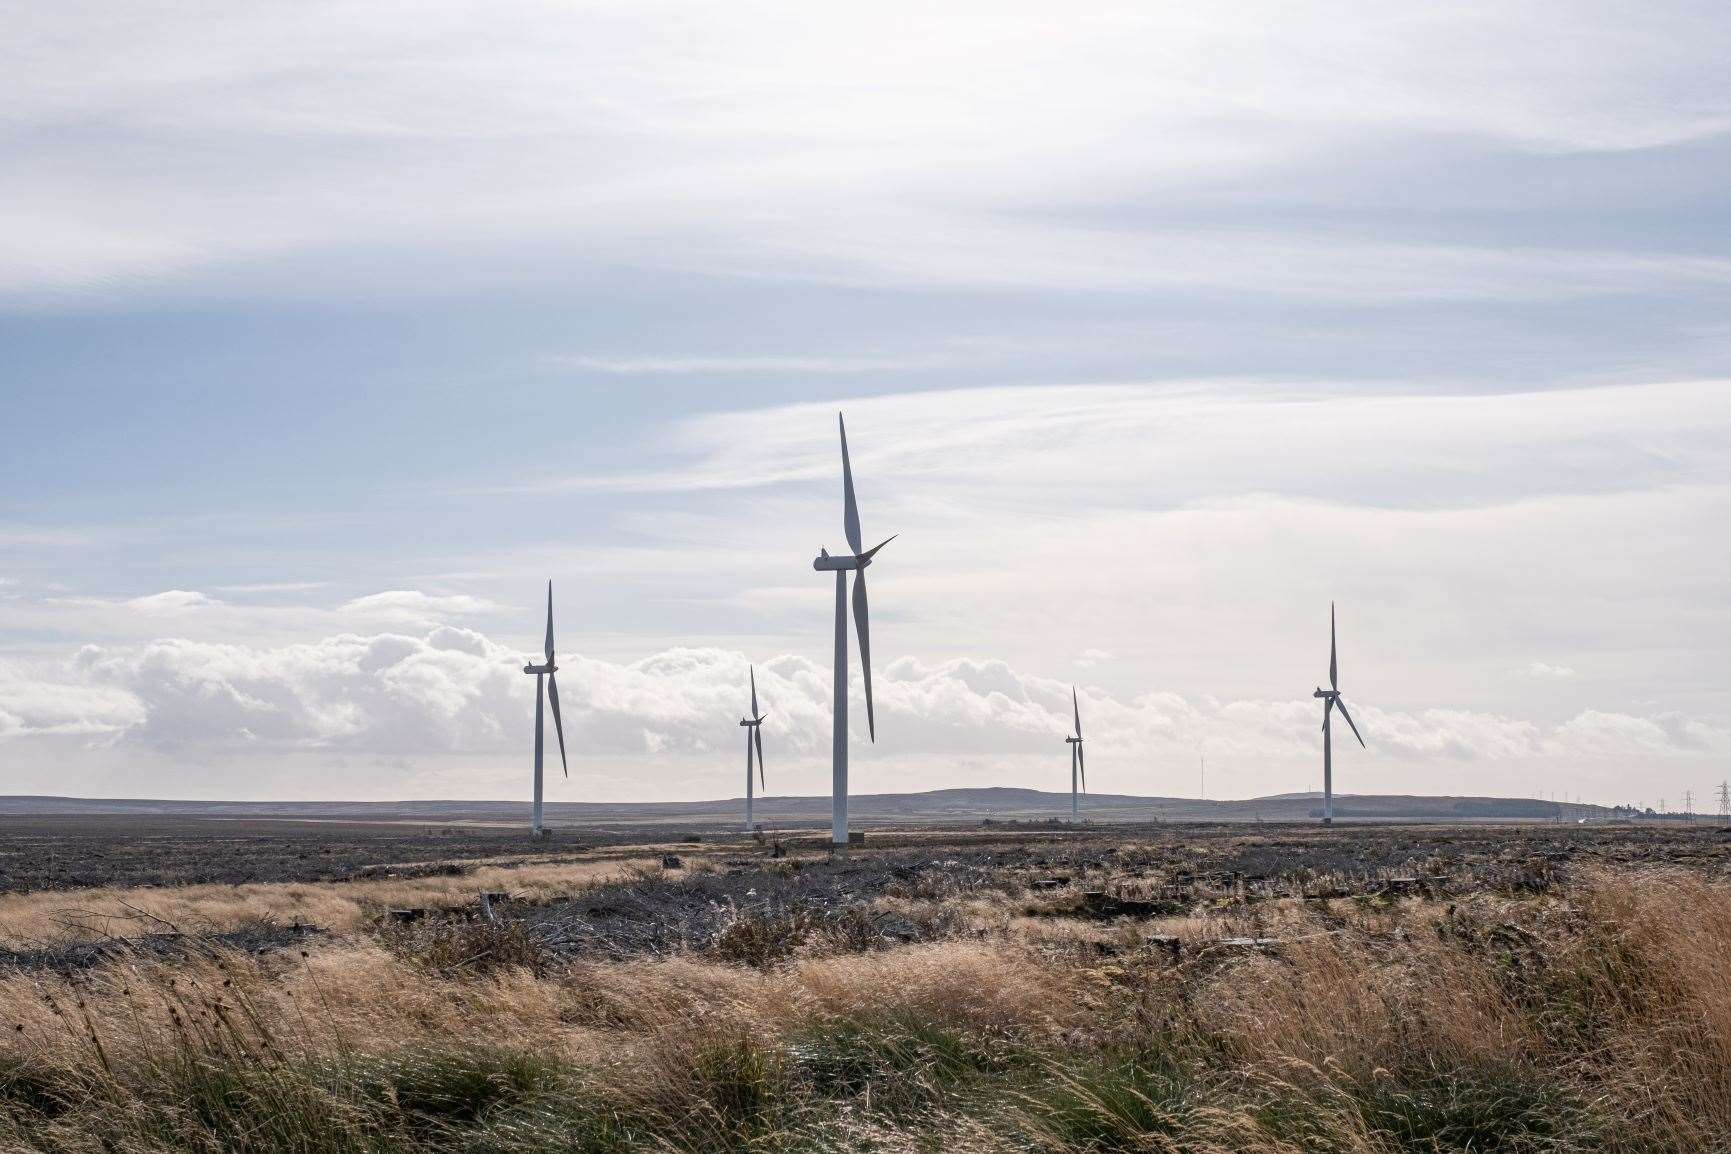 The 30MW, 15-turbine Halsary wind farm south of Spittal came into operation in July 2021.